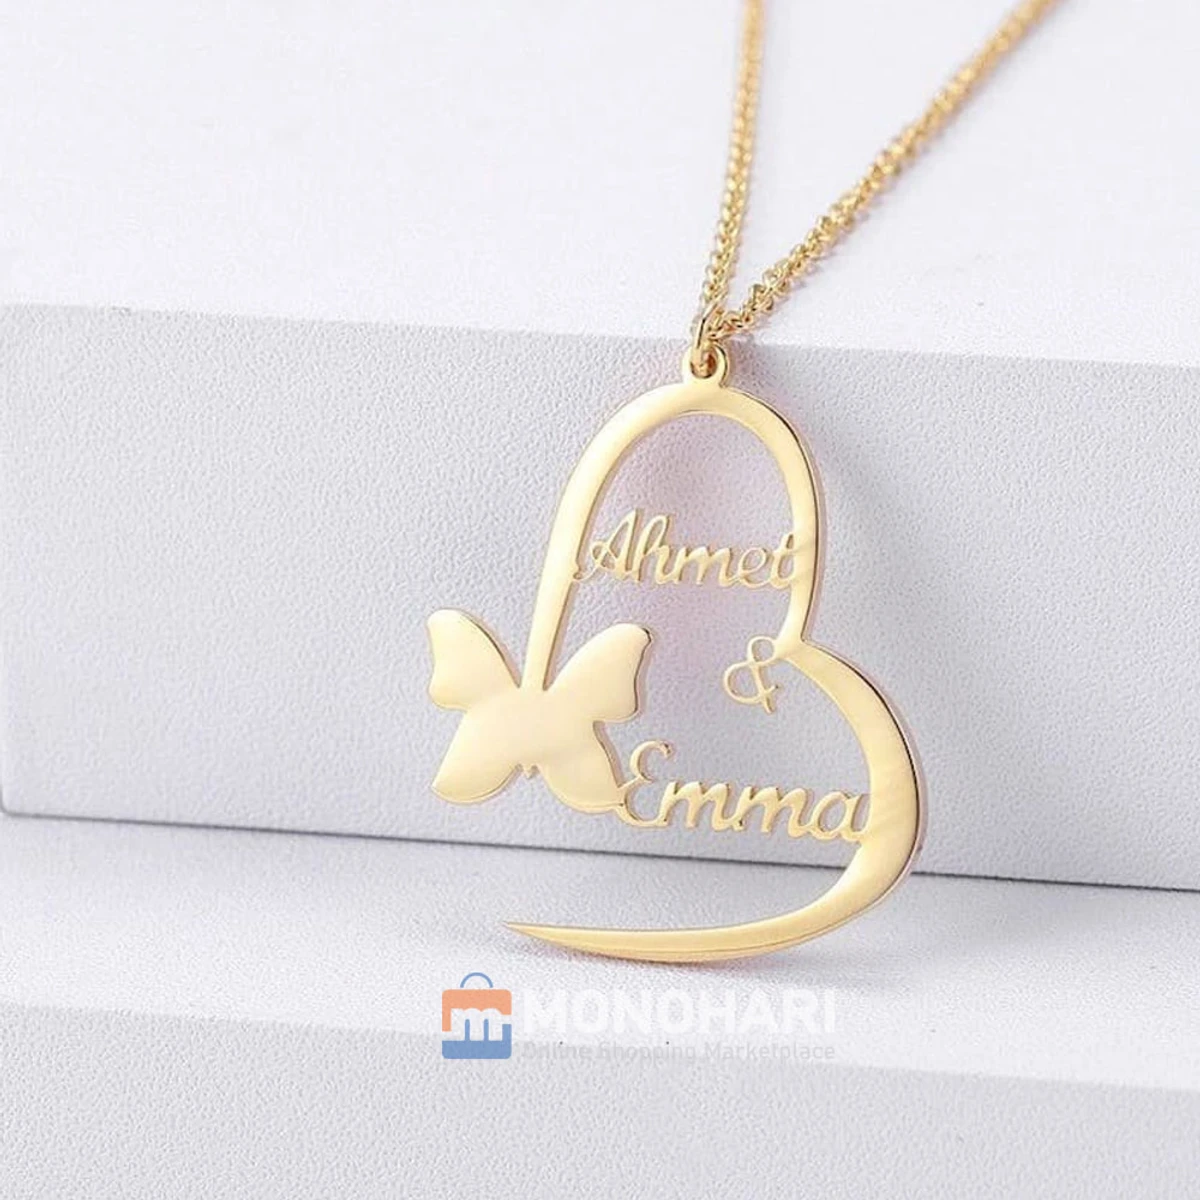 Couple Name Necklace (James & Amanda) Covered Heart & Butterfly Shape 22K Gold Plated Customized Necklace